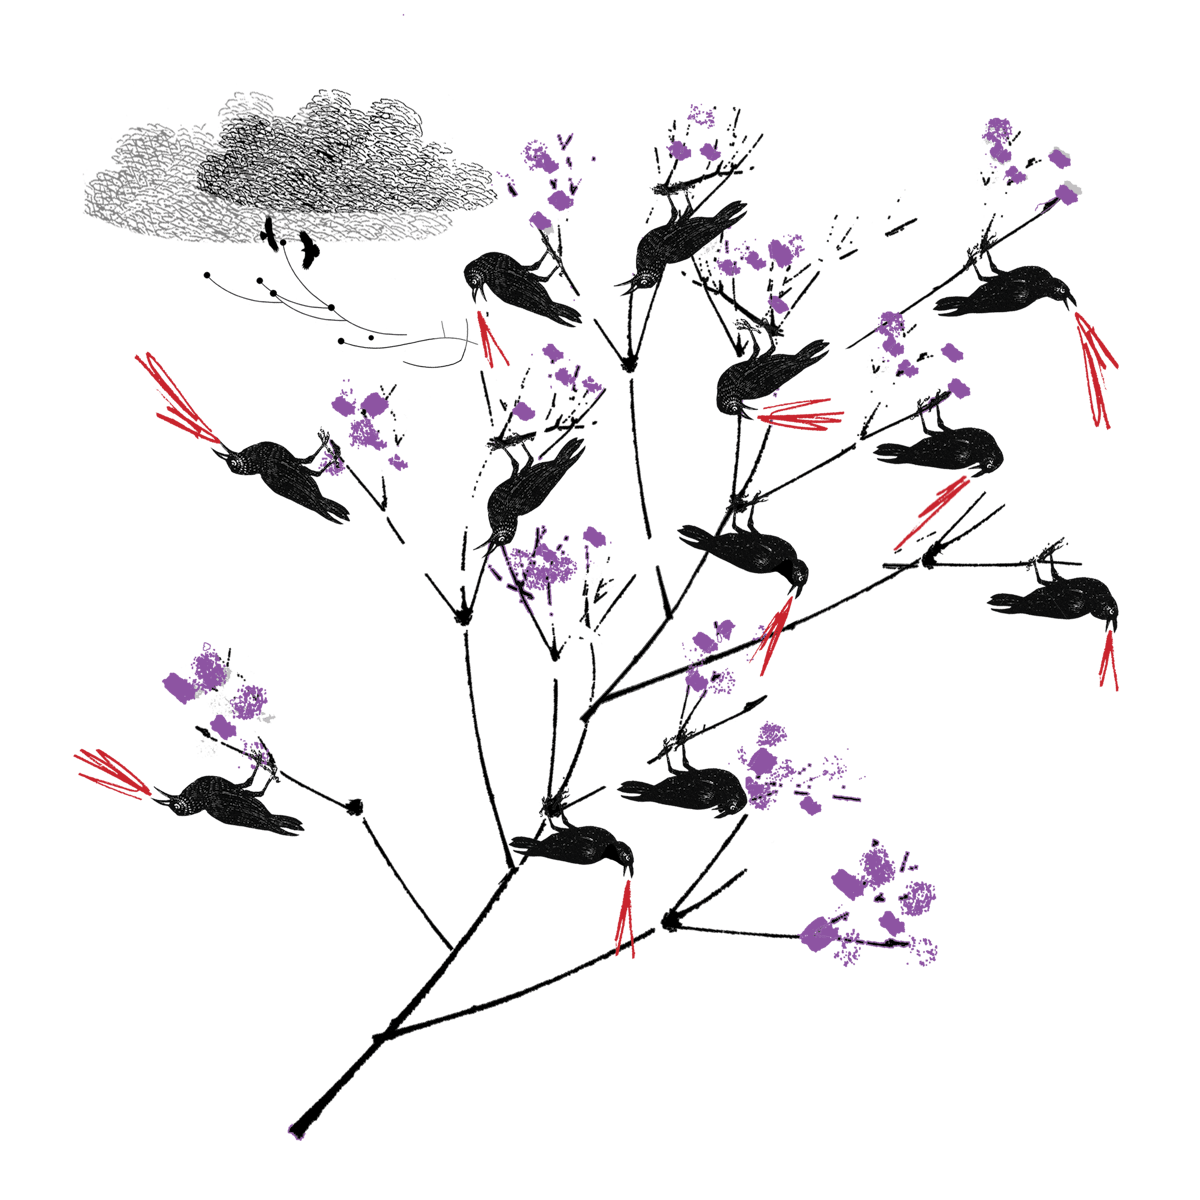 Some black crows perch in a thin tree with purple flowers.